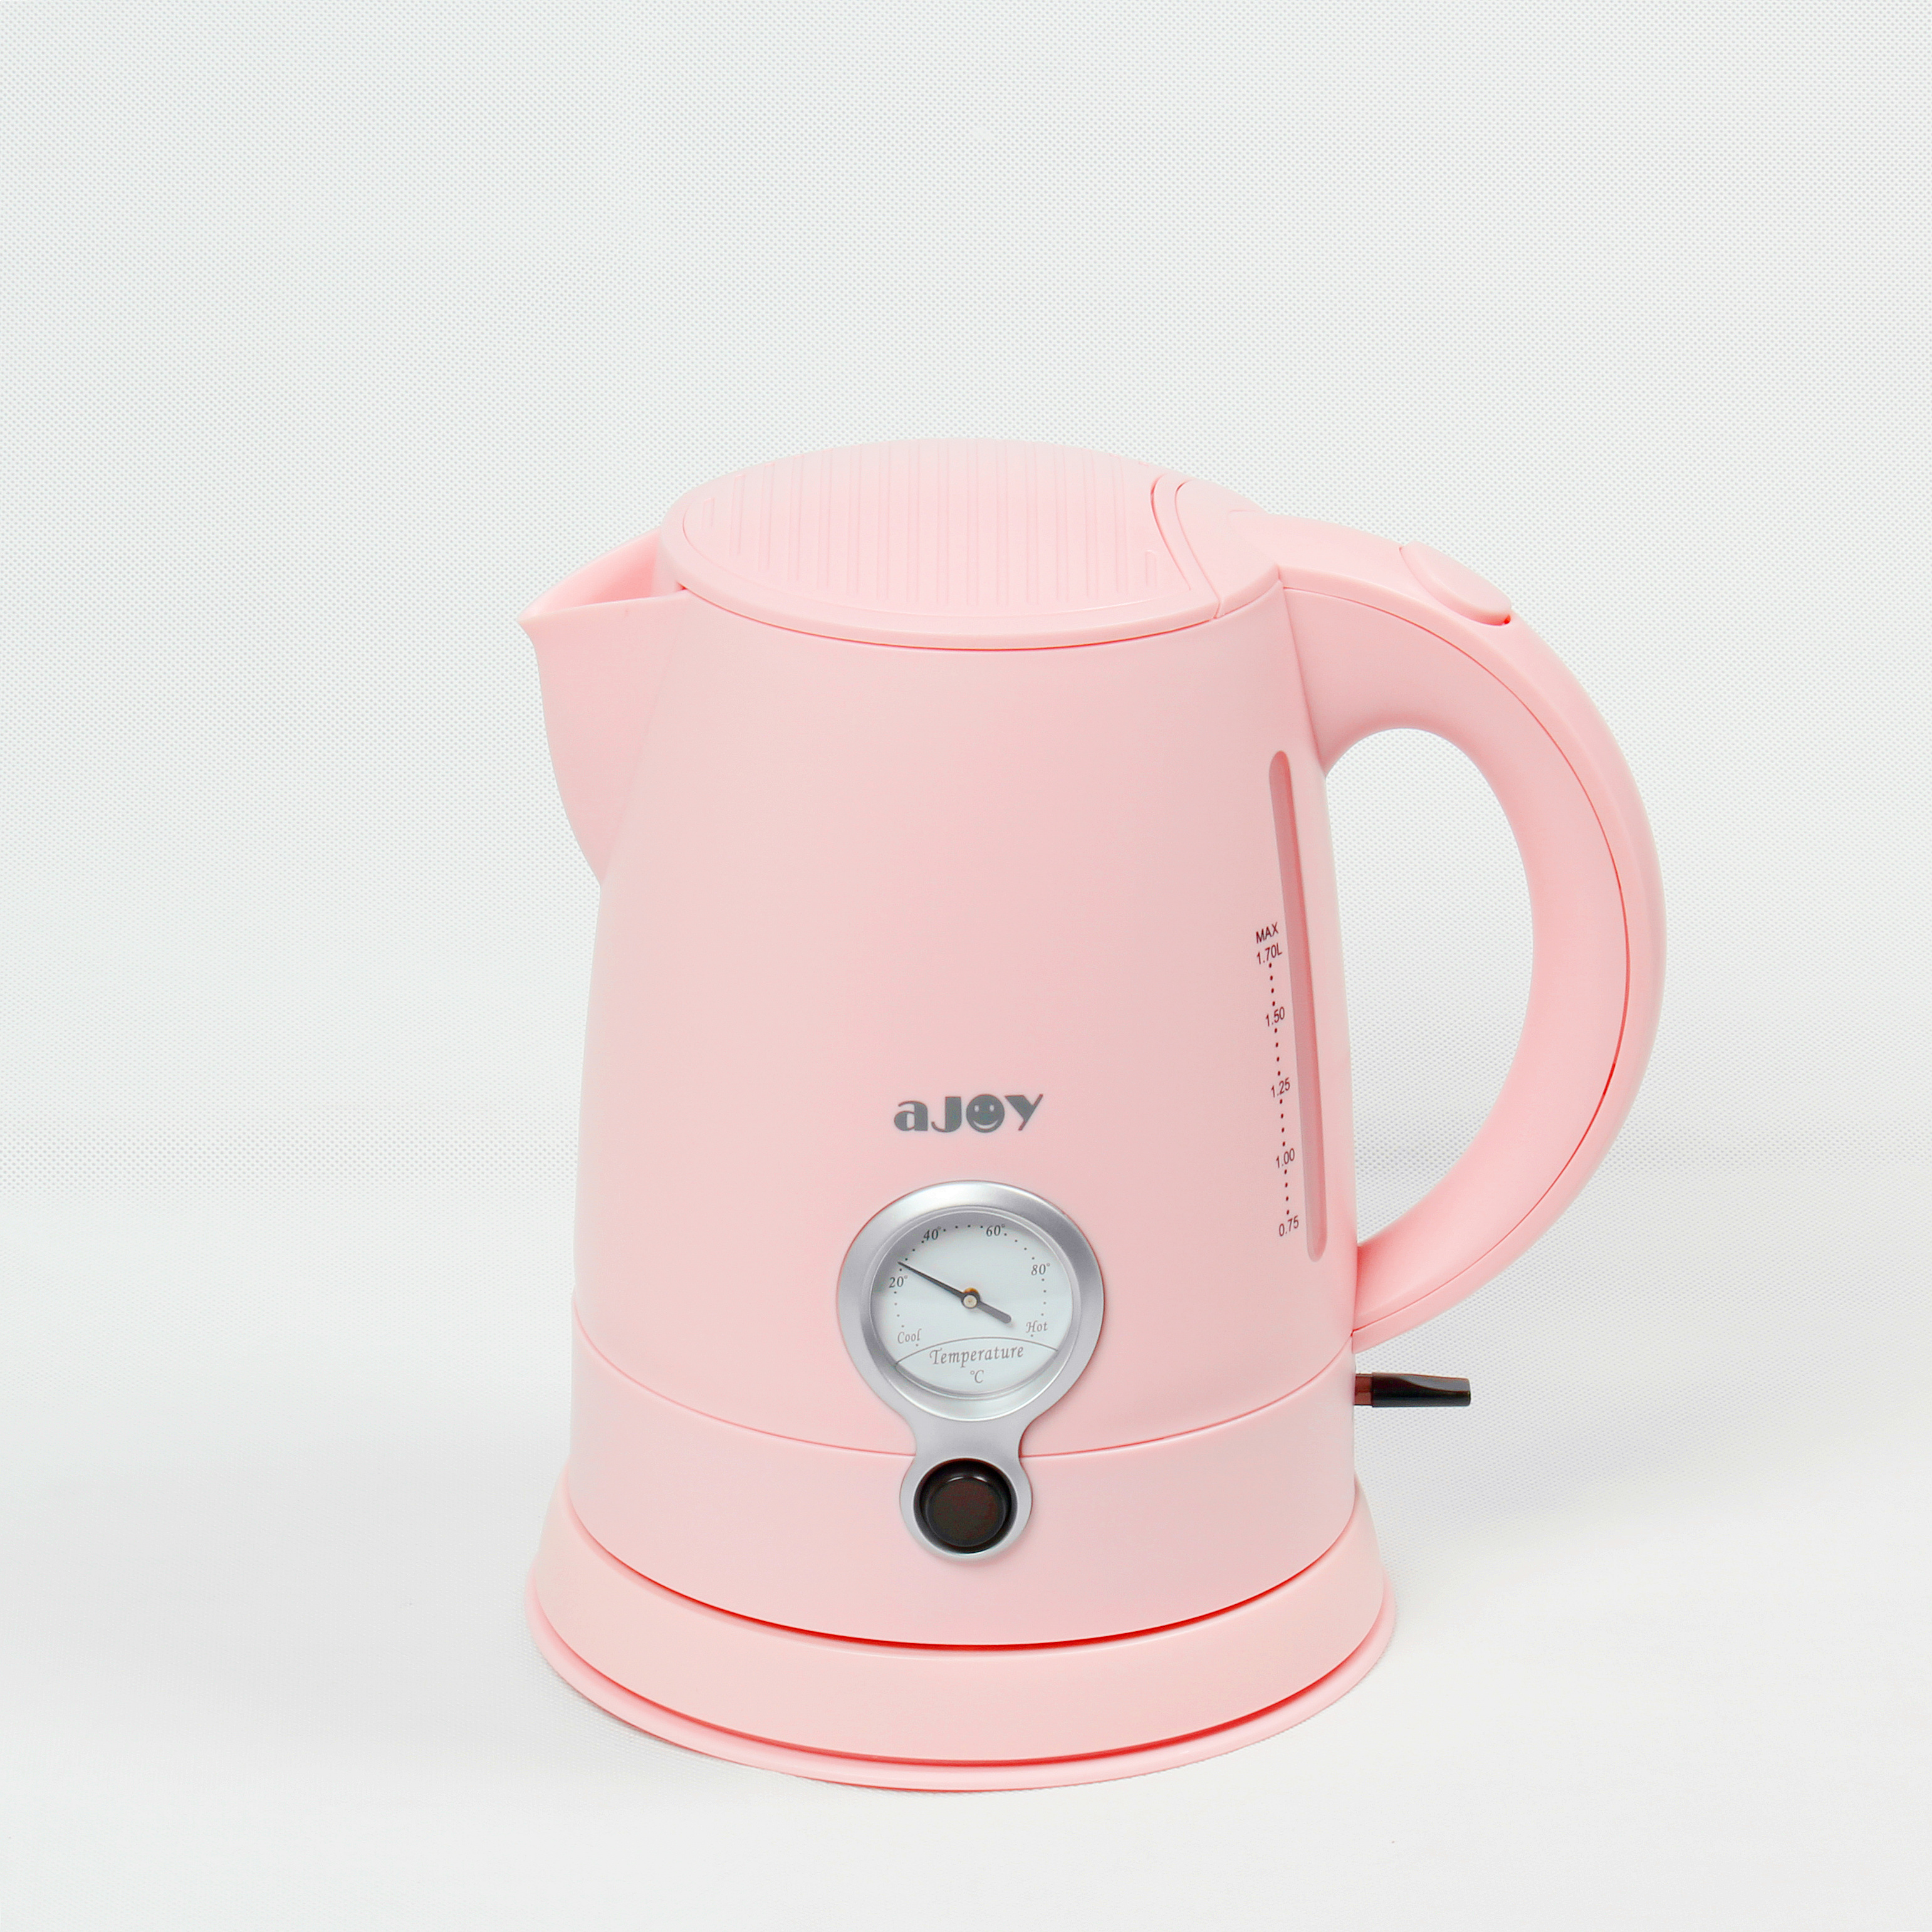 http://www.ajoyworld.com/images/Products/Kettle/PK.JPG